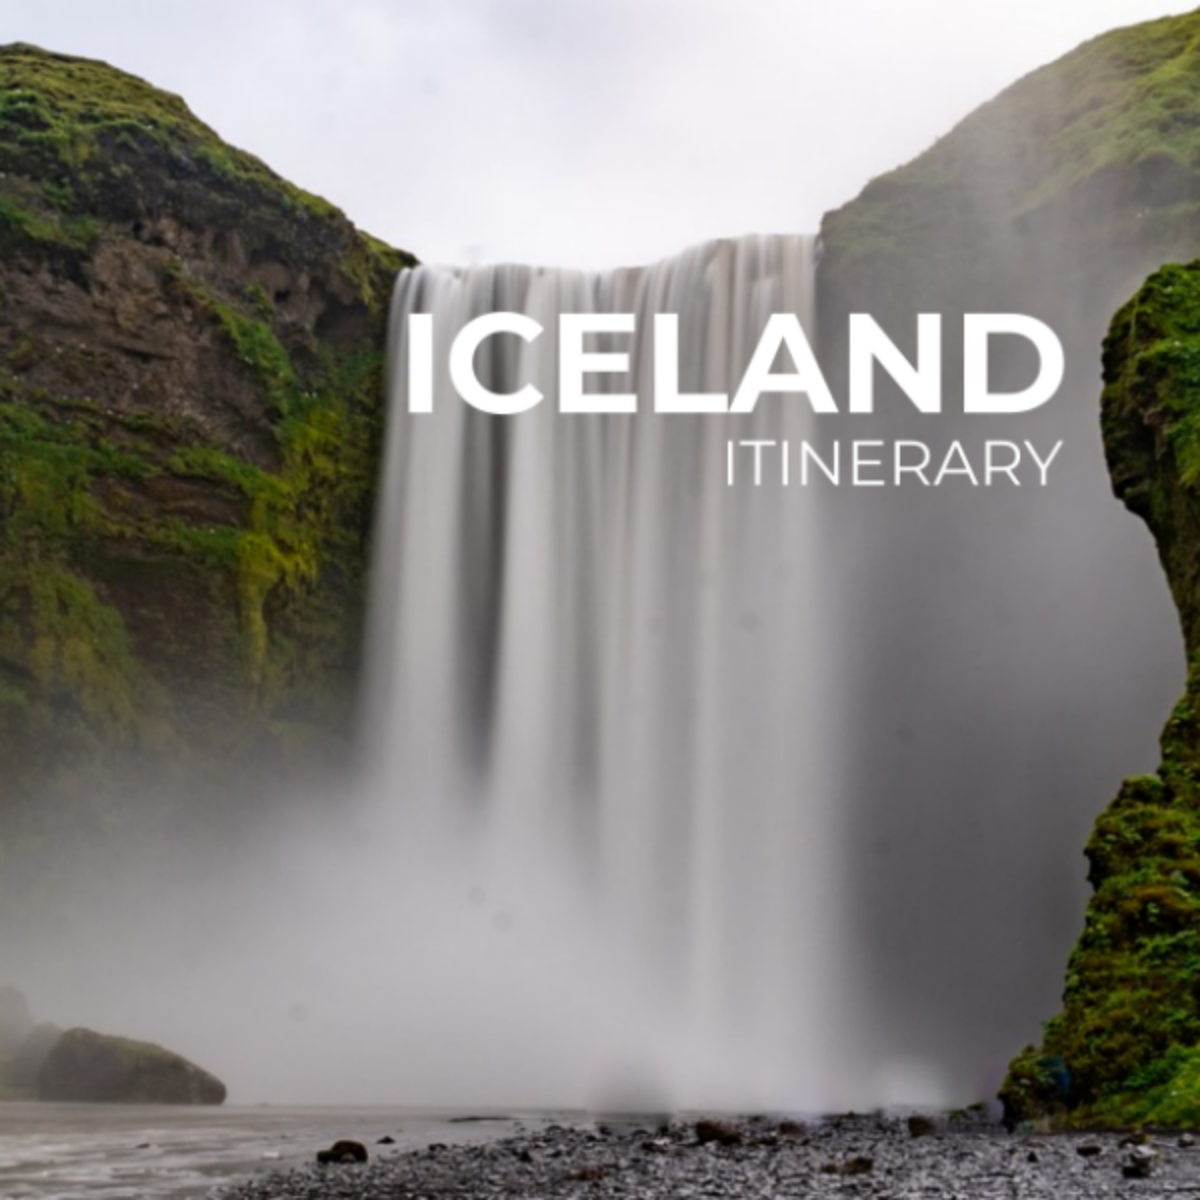 Iceland Trip Itinerary Template